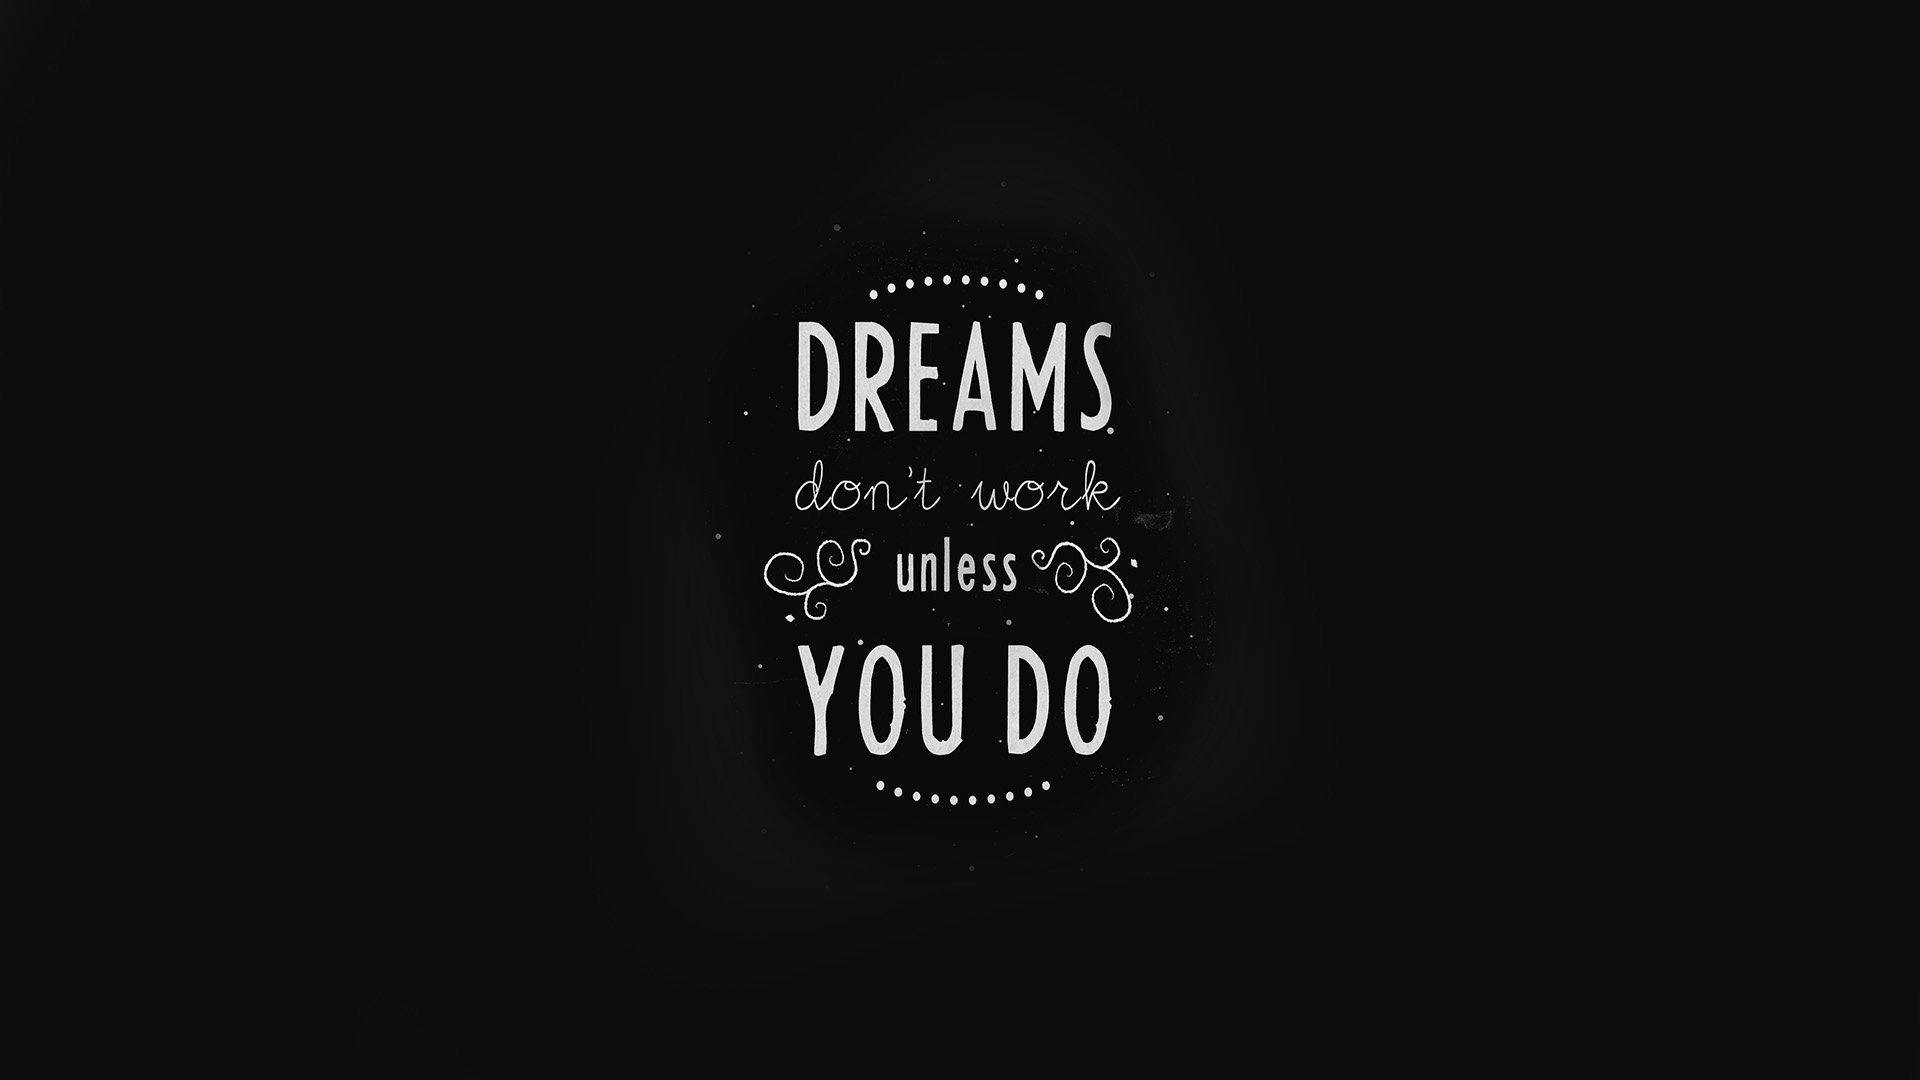 Details more than 140 chase your dreams wallpaper best